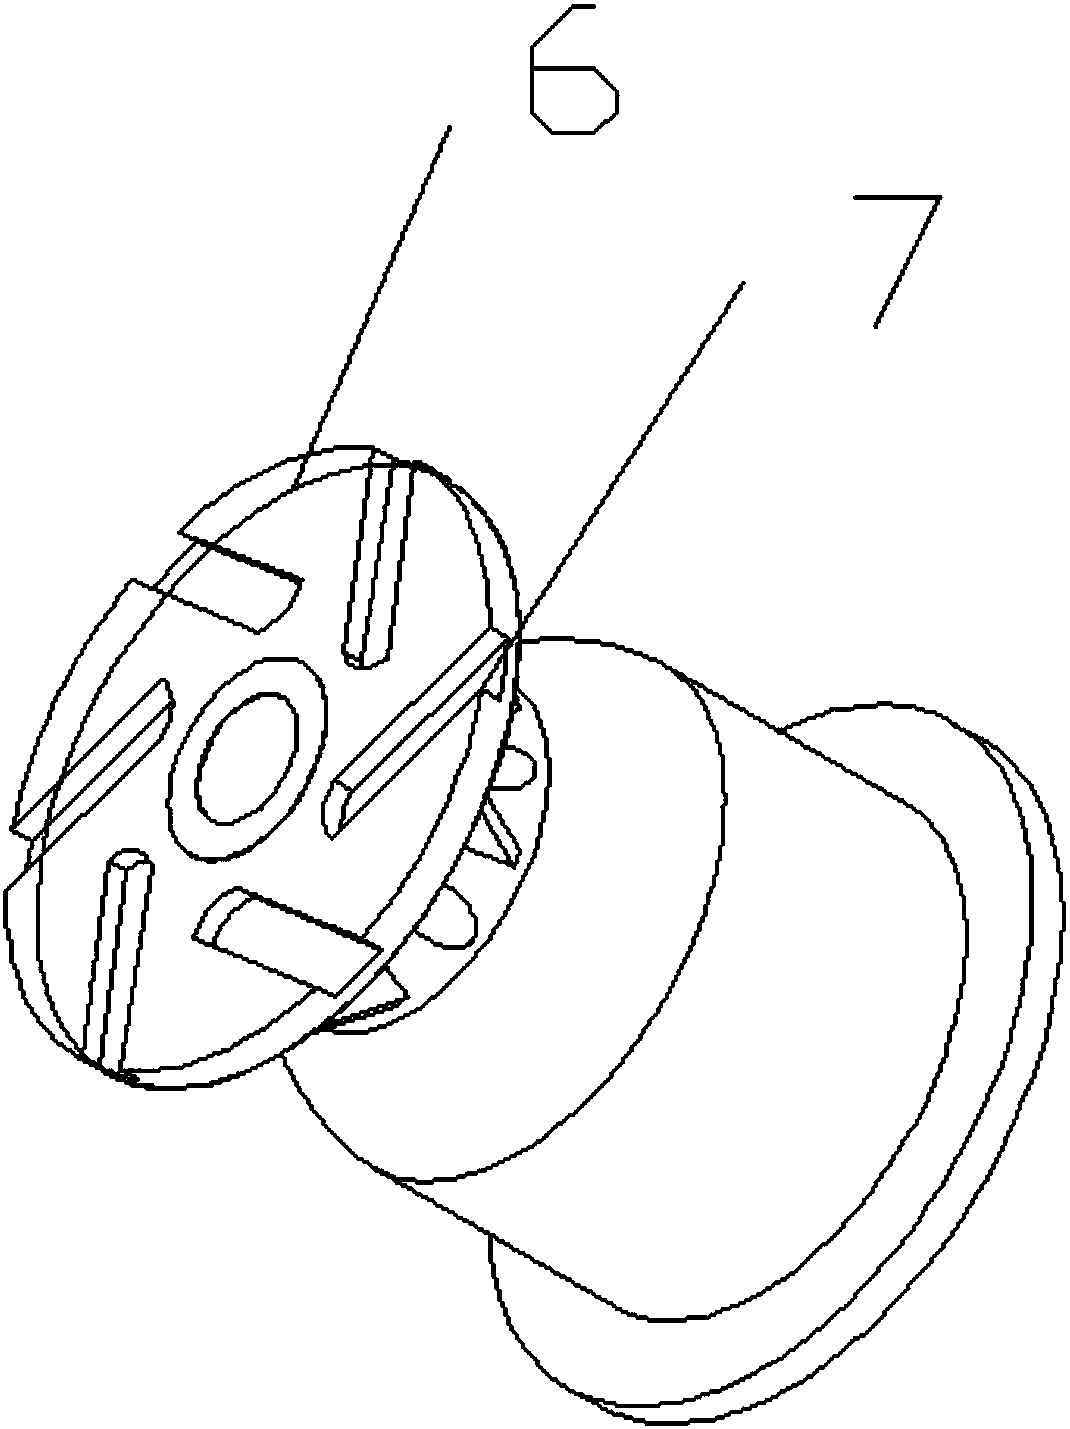 Blower inlet casing device for immersible pump